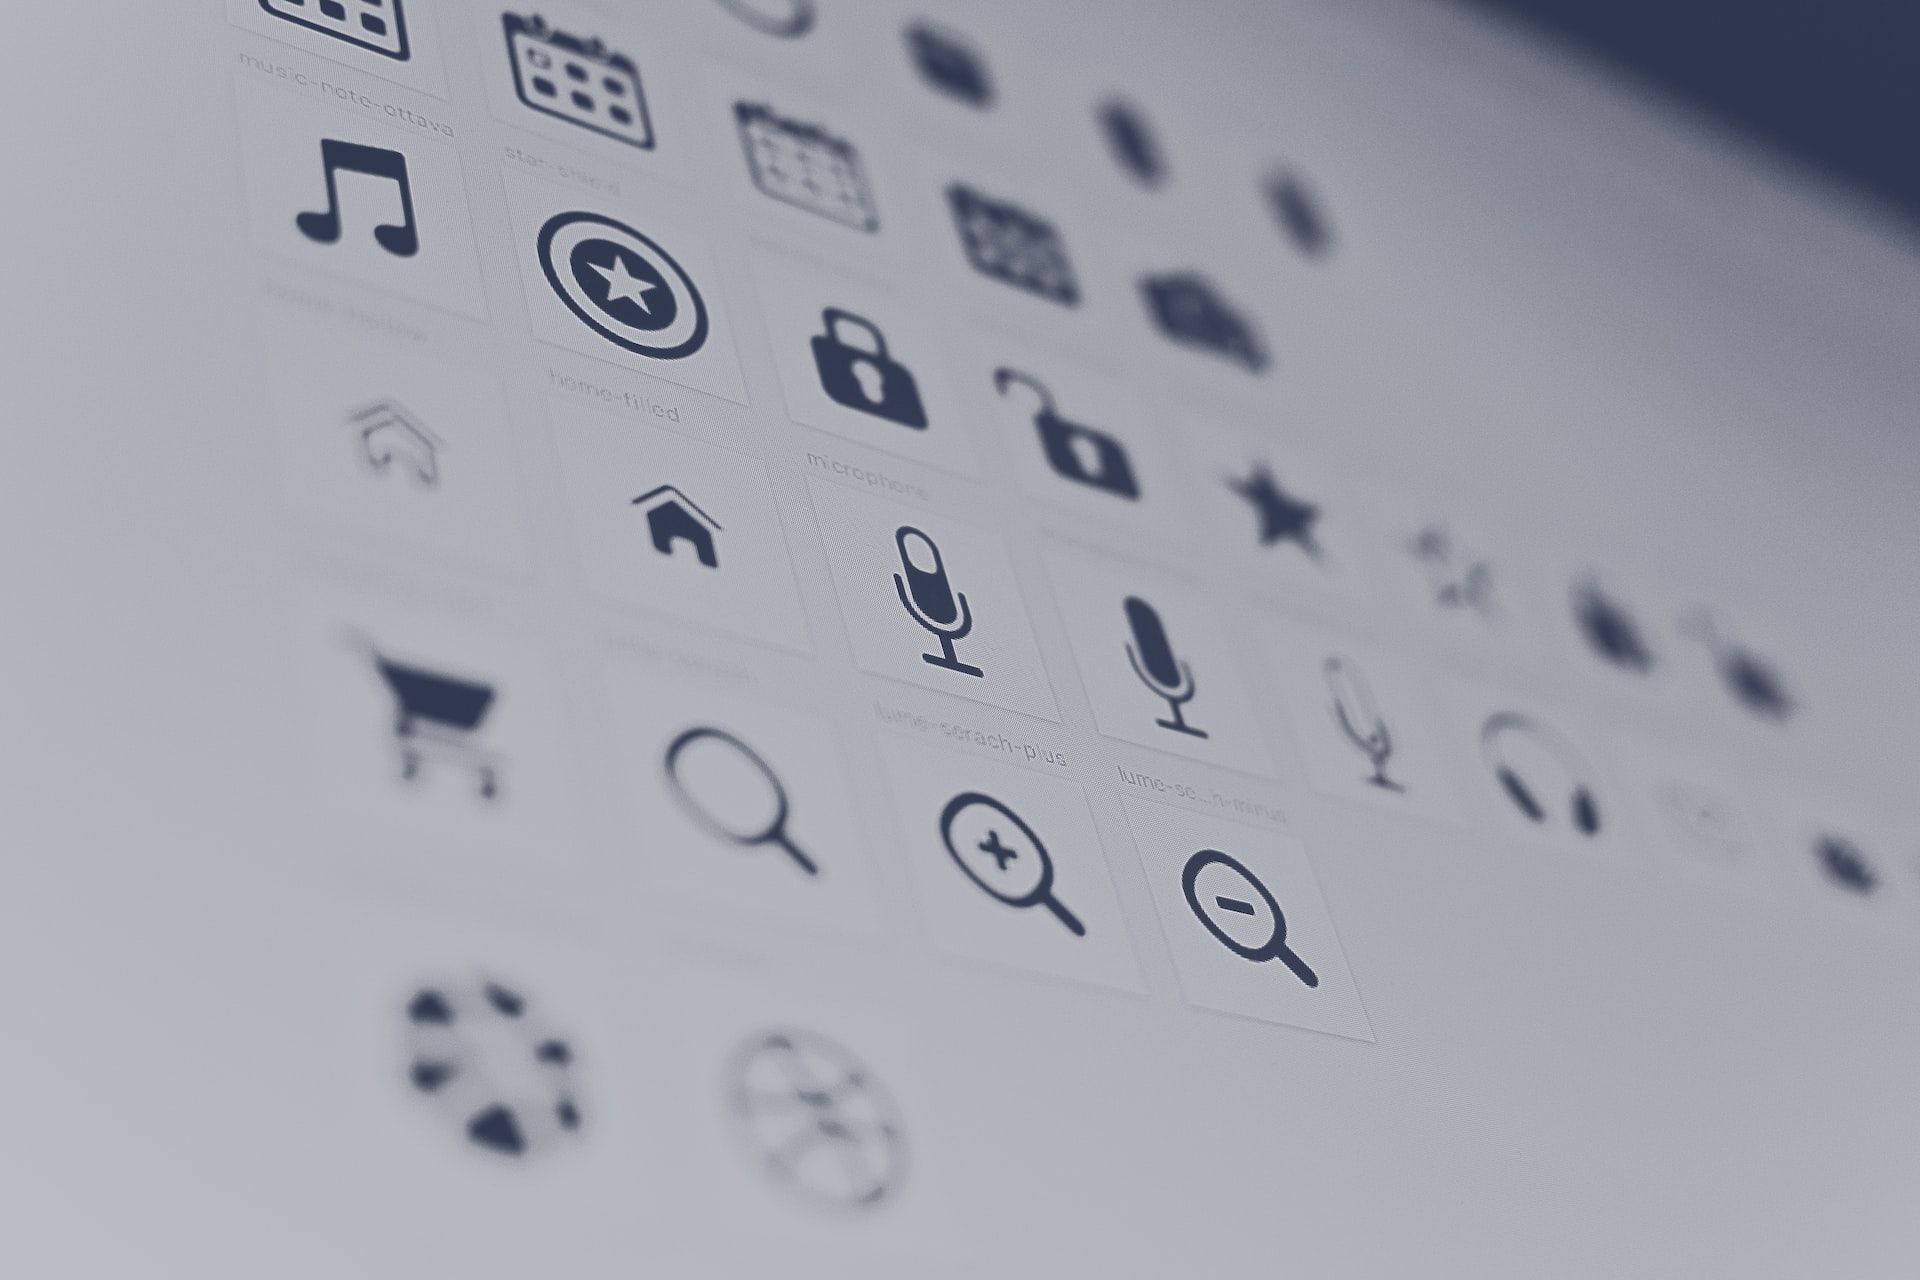 A series of small icons in a grid